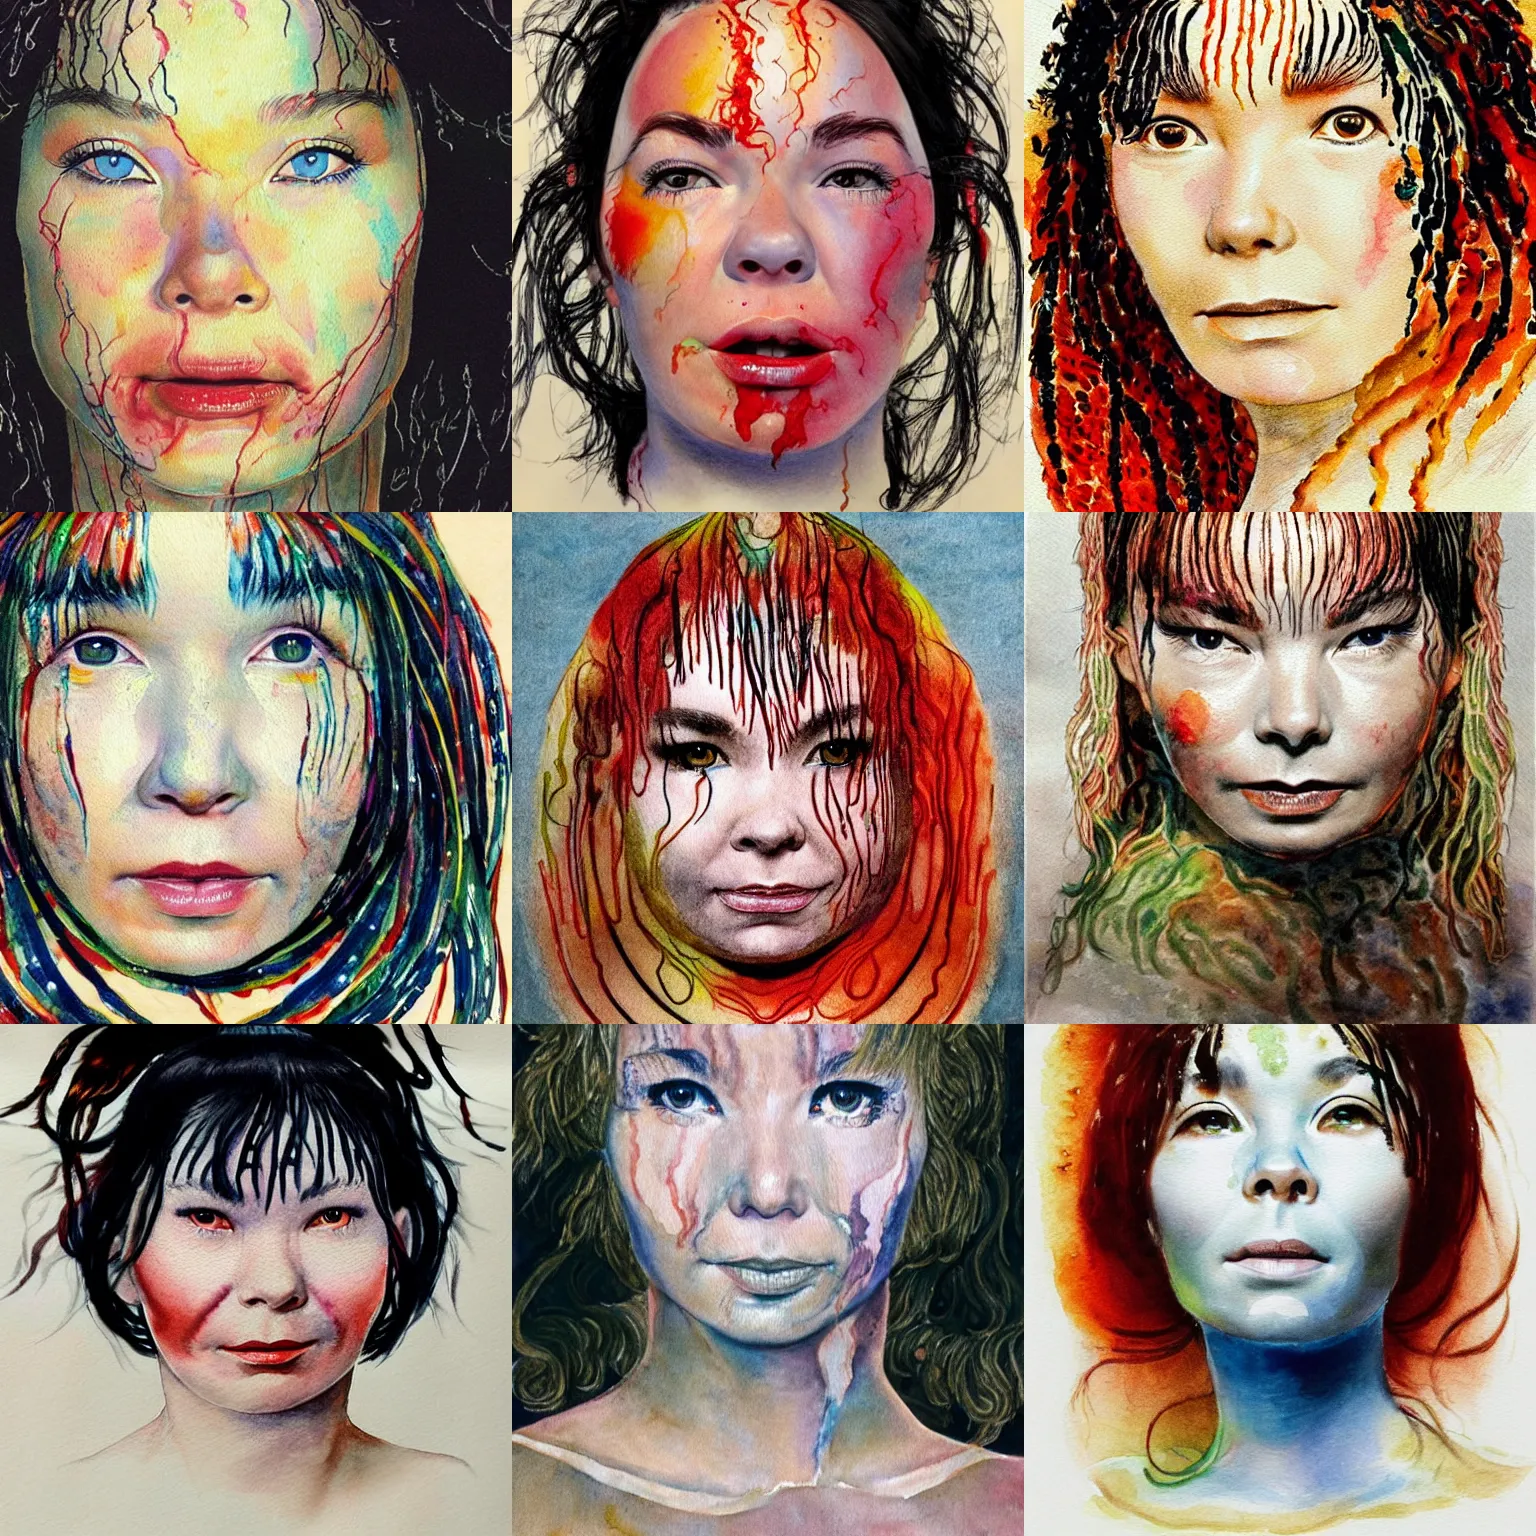 Prompt: photorealistic portrait of bjork's face, beautifully painted in watercolor by william blake, 1 8 2 6. bjork's face is covered in spaghetti sauce, marinara.